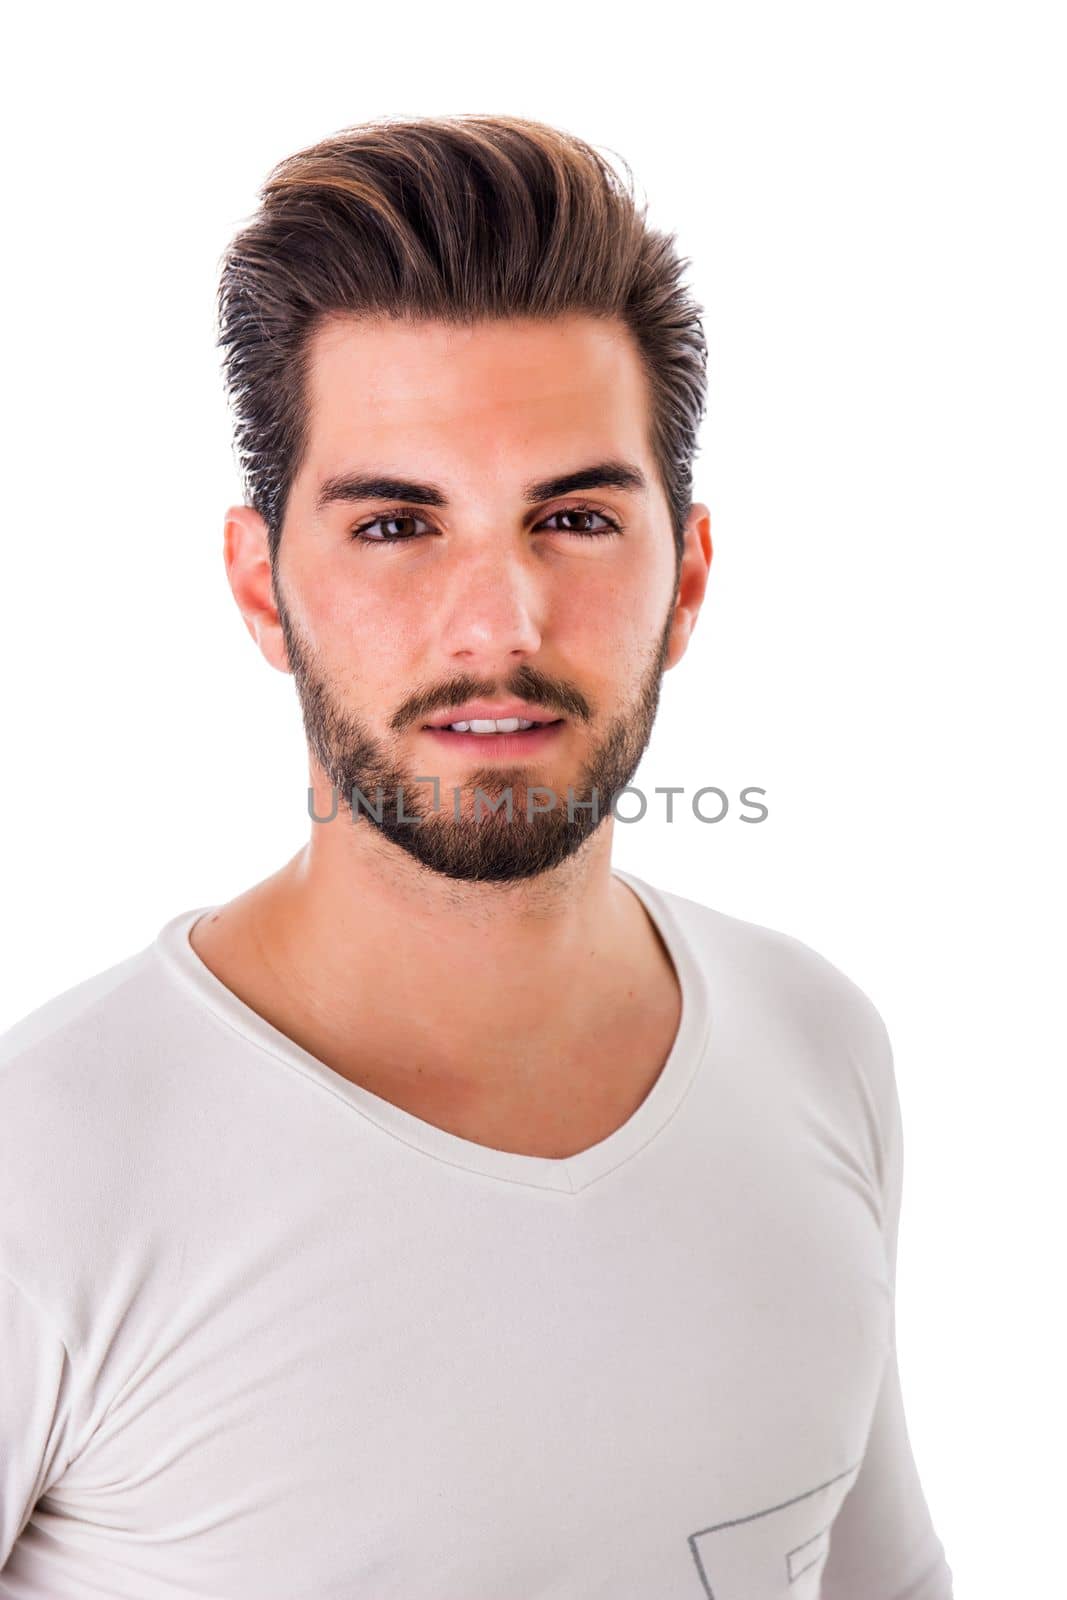 Handsome young man standing with white shirt by artofphoto